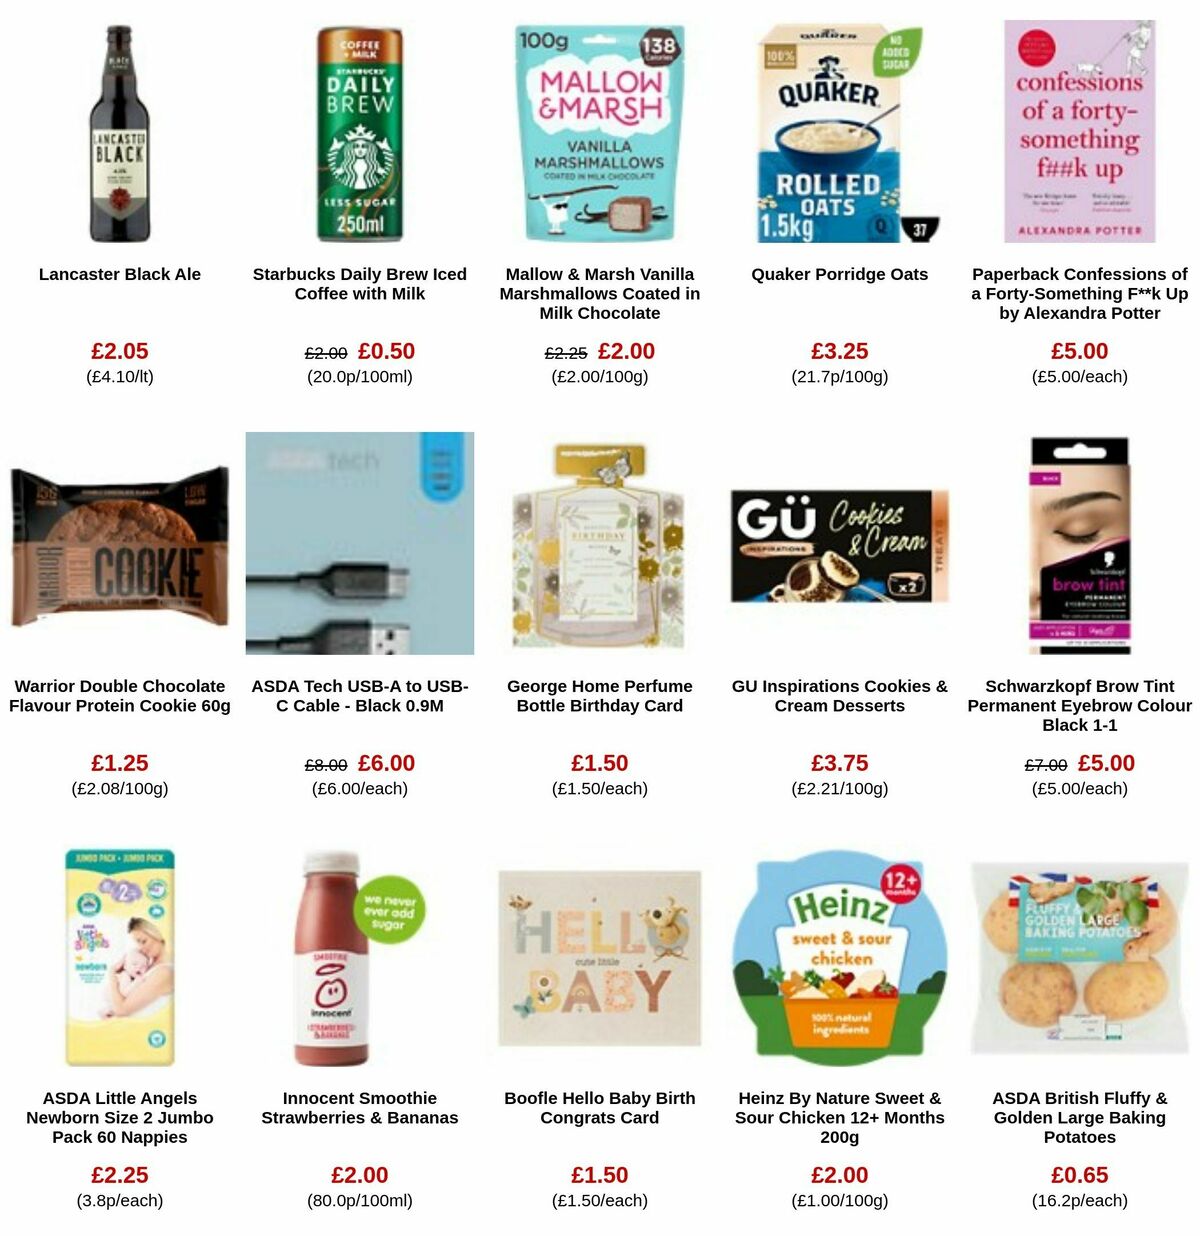 ASDA Offers from 24 November